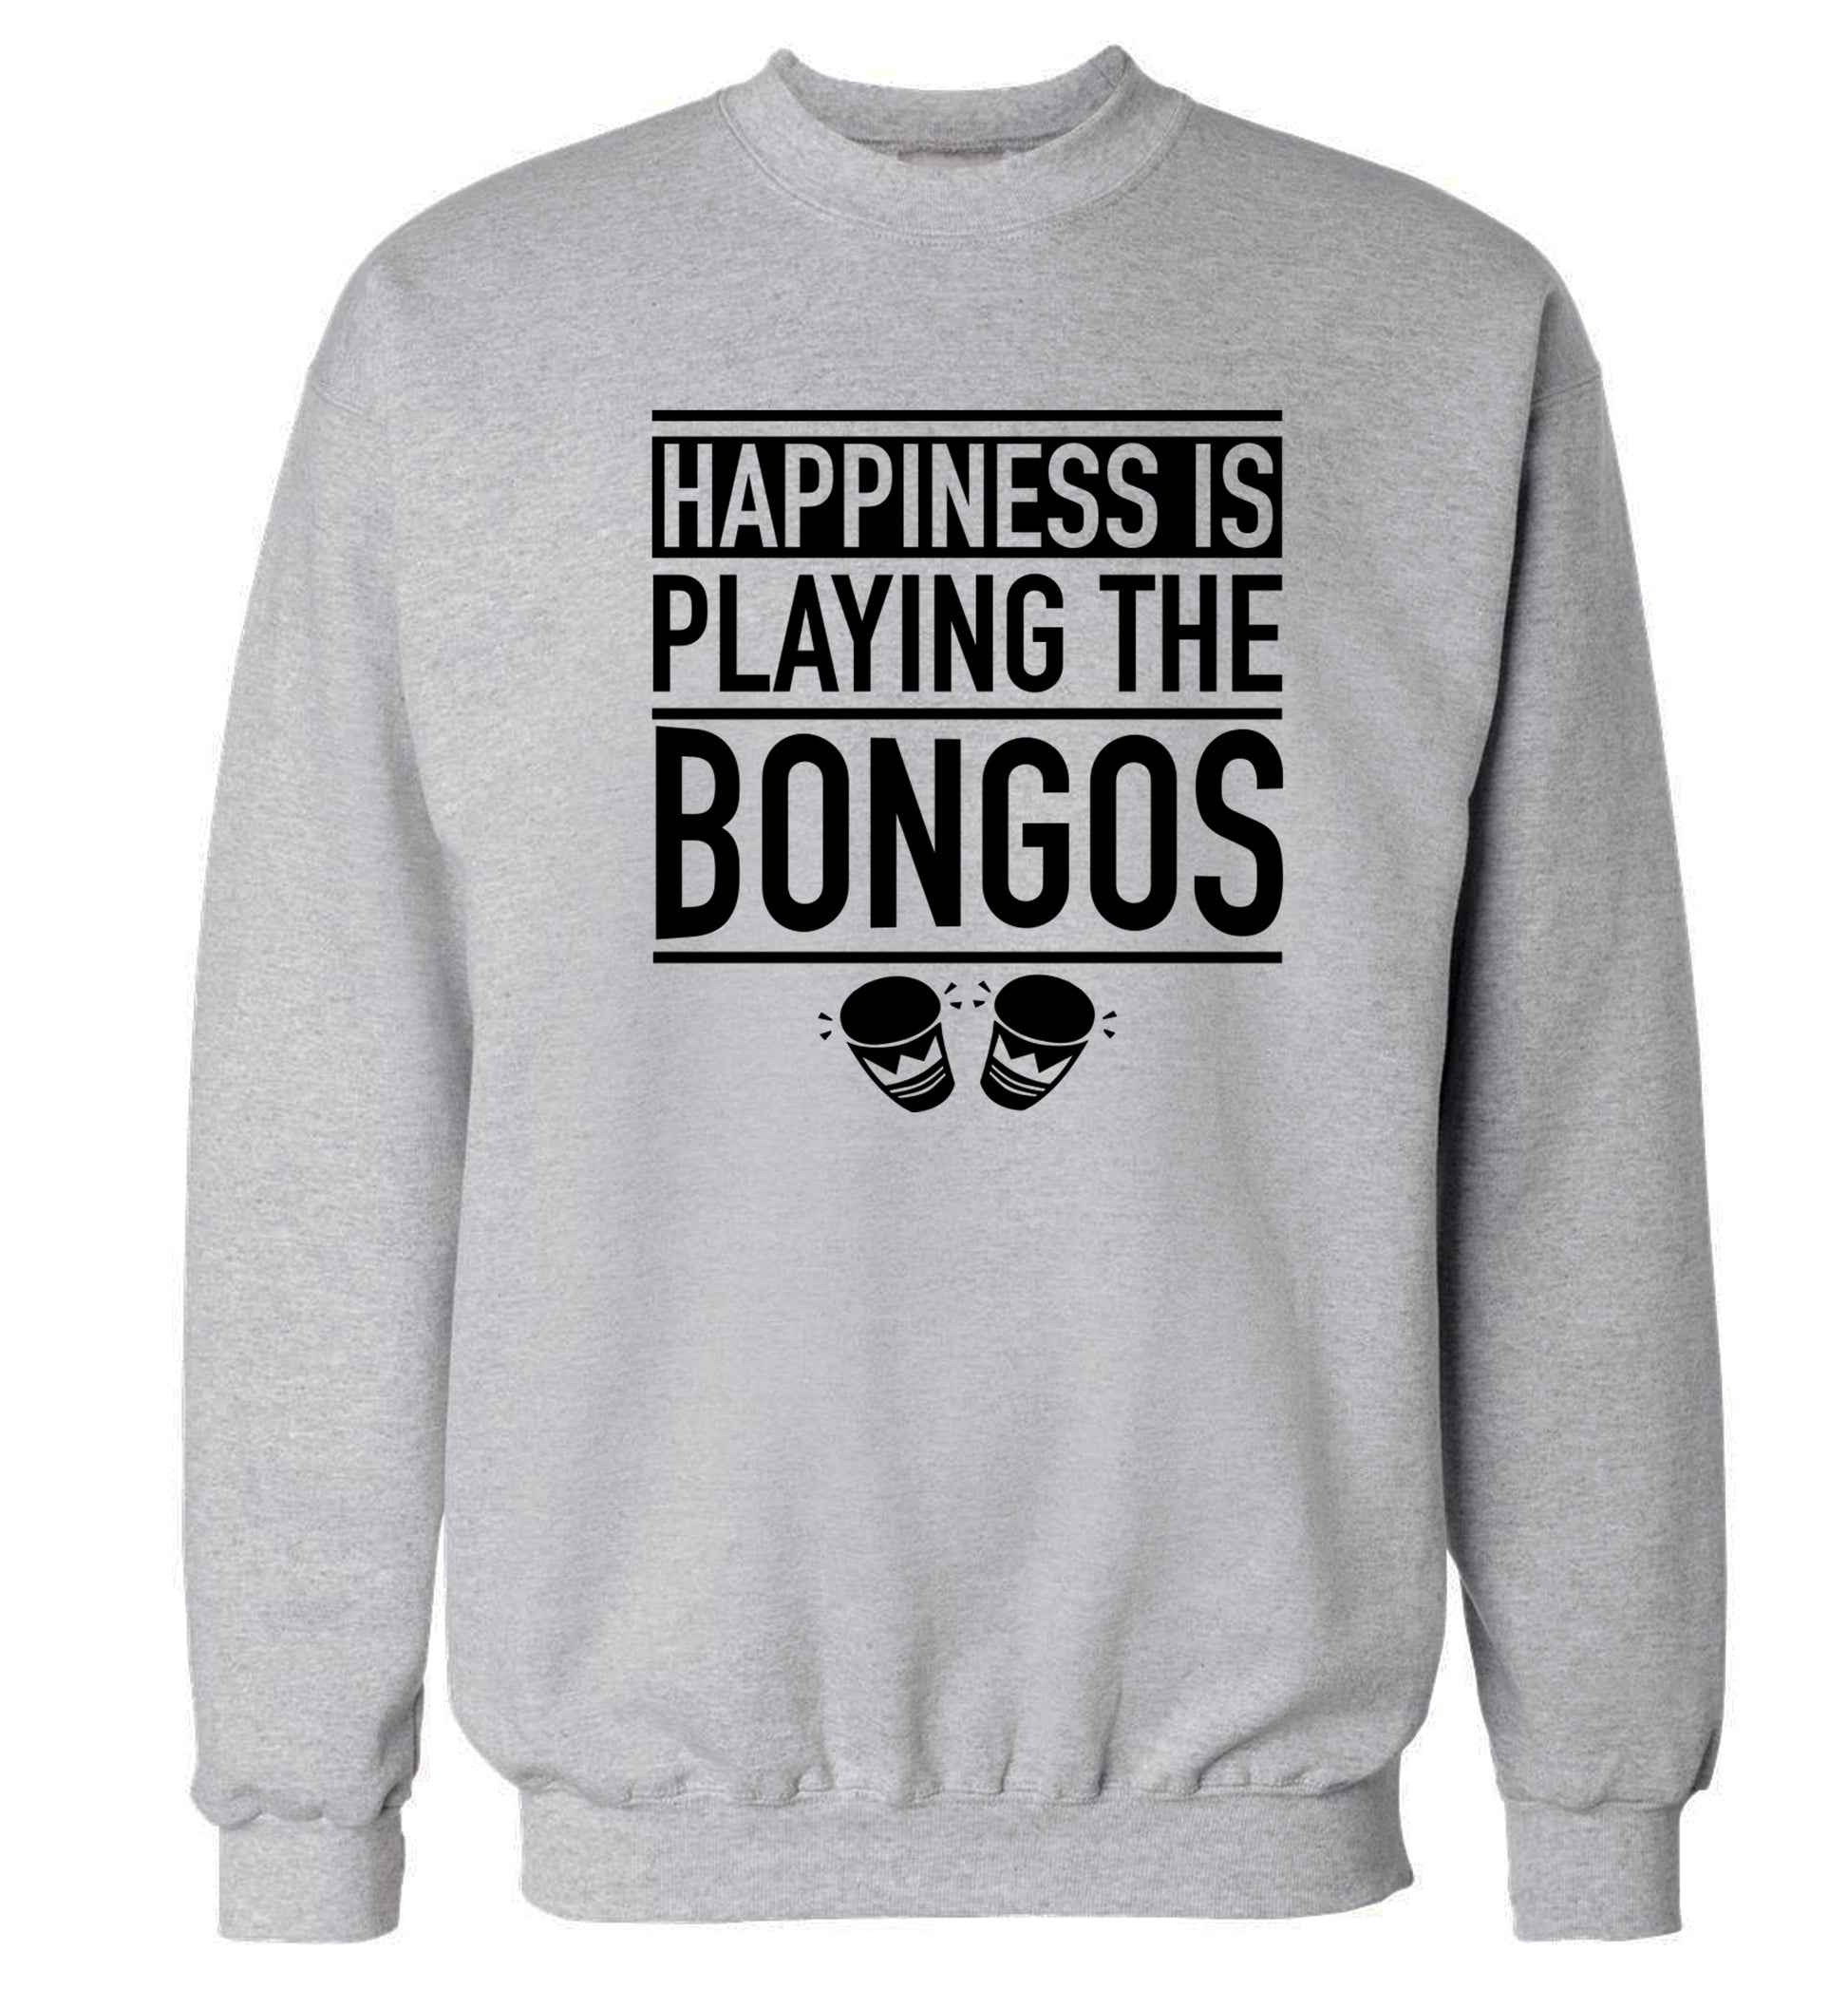 Happiness is playing the bongos Adult's unisex grey Sweater 2XL